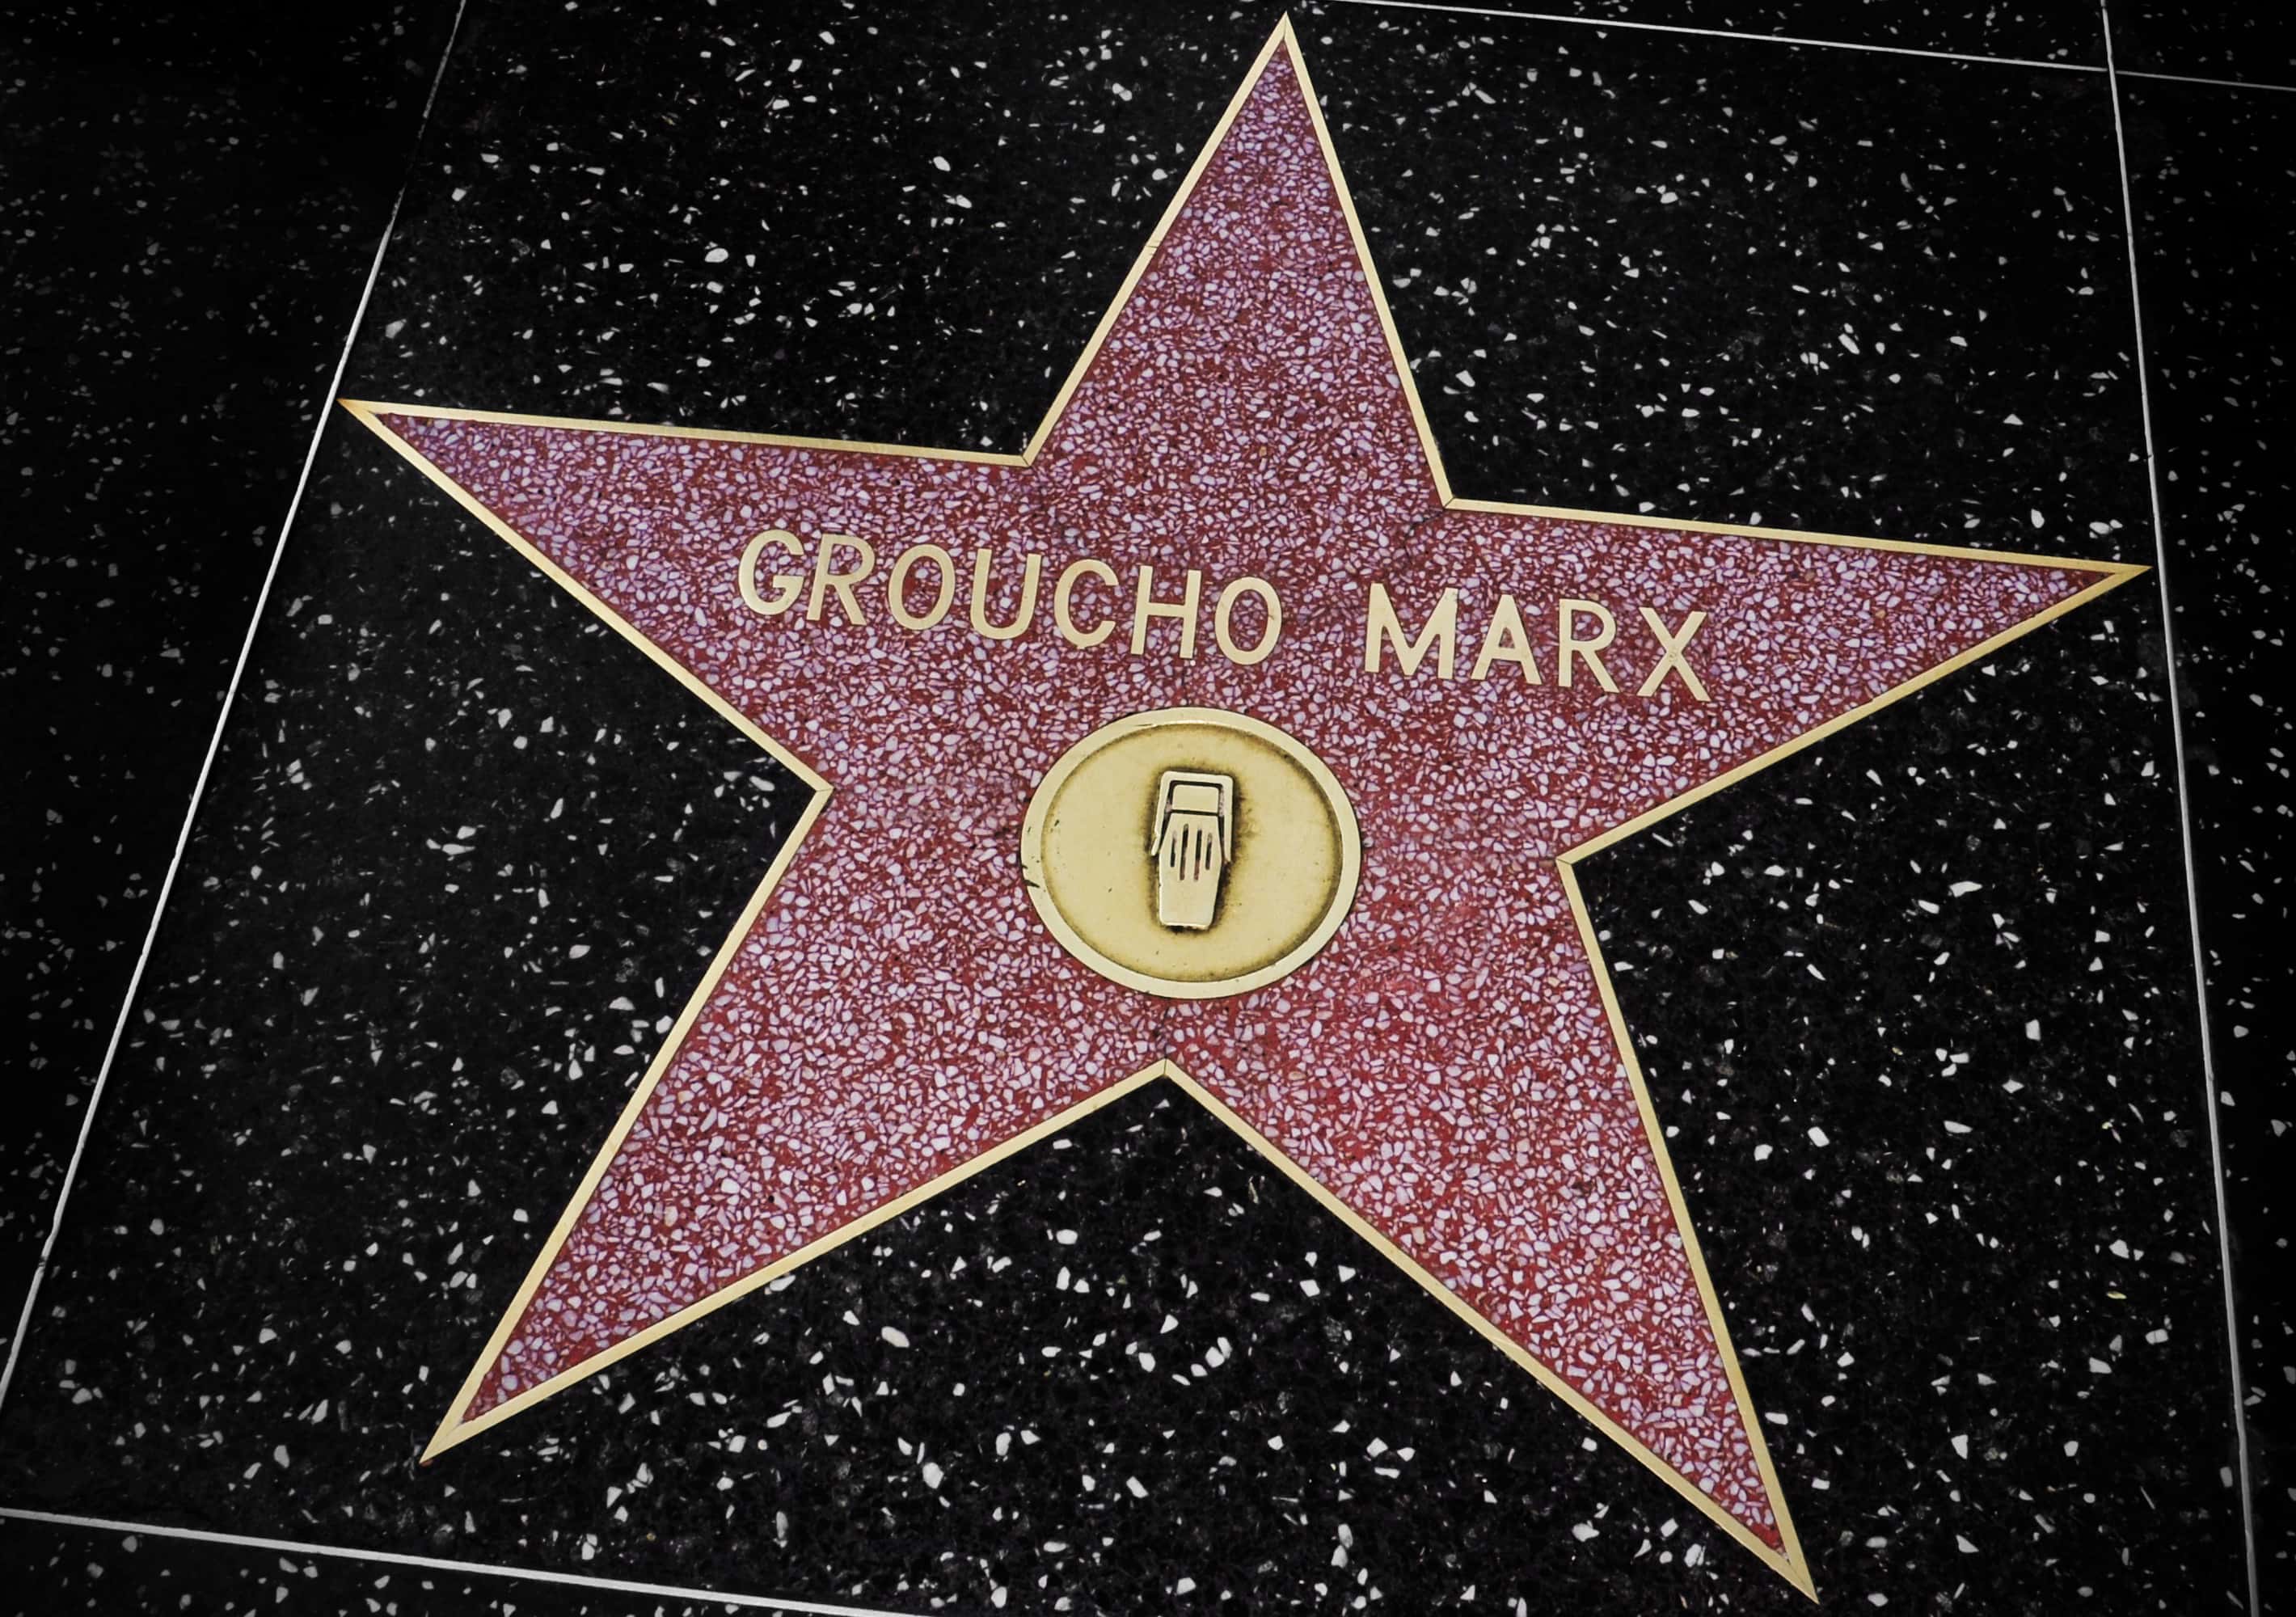 Groucho Marx facts